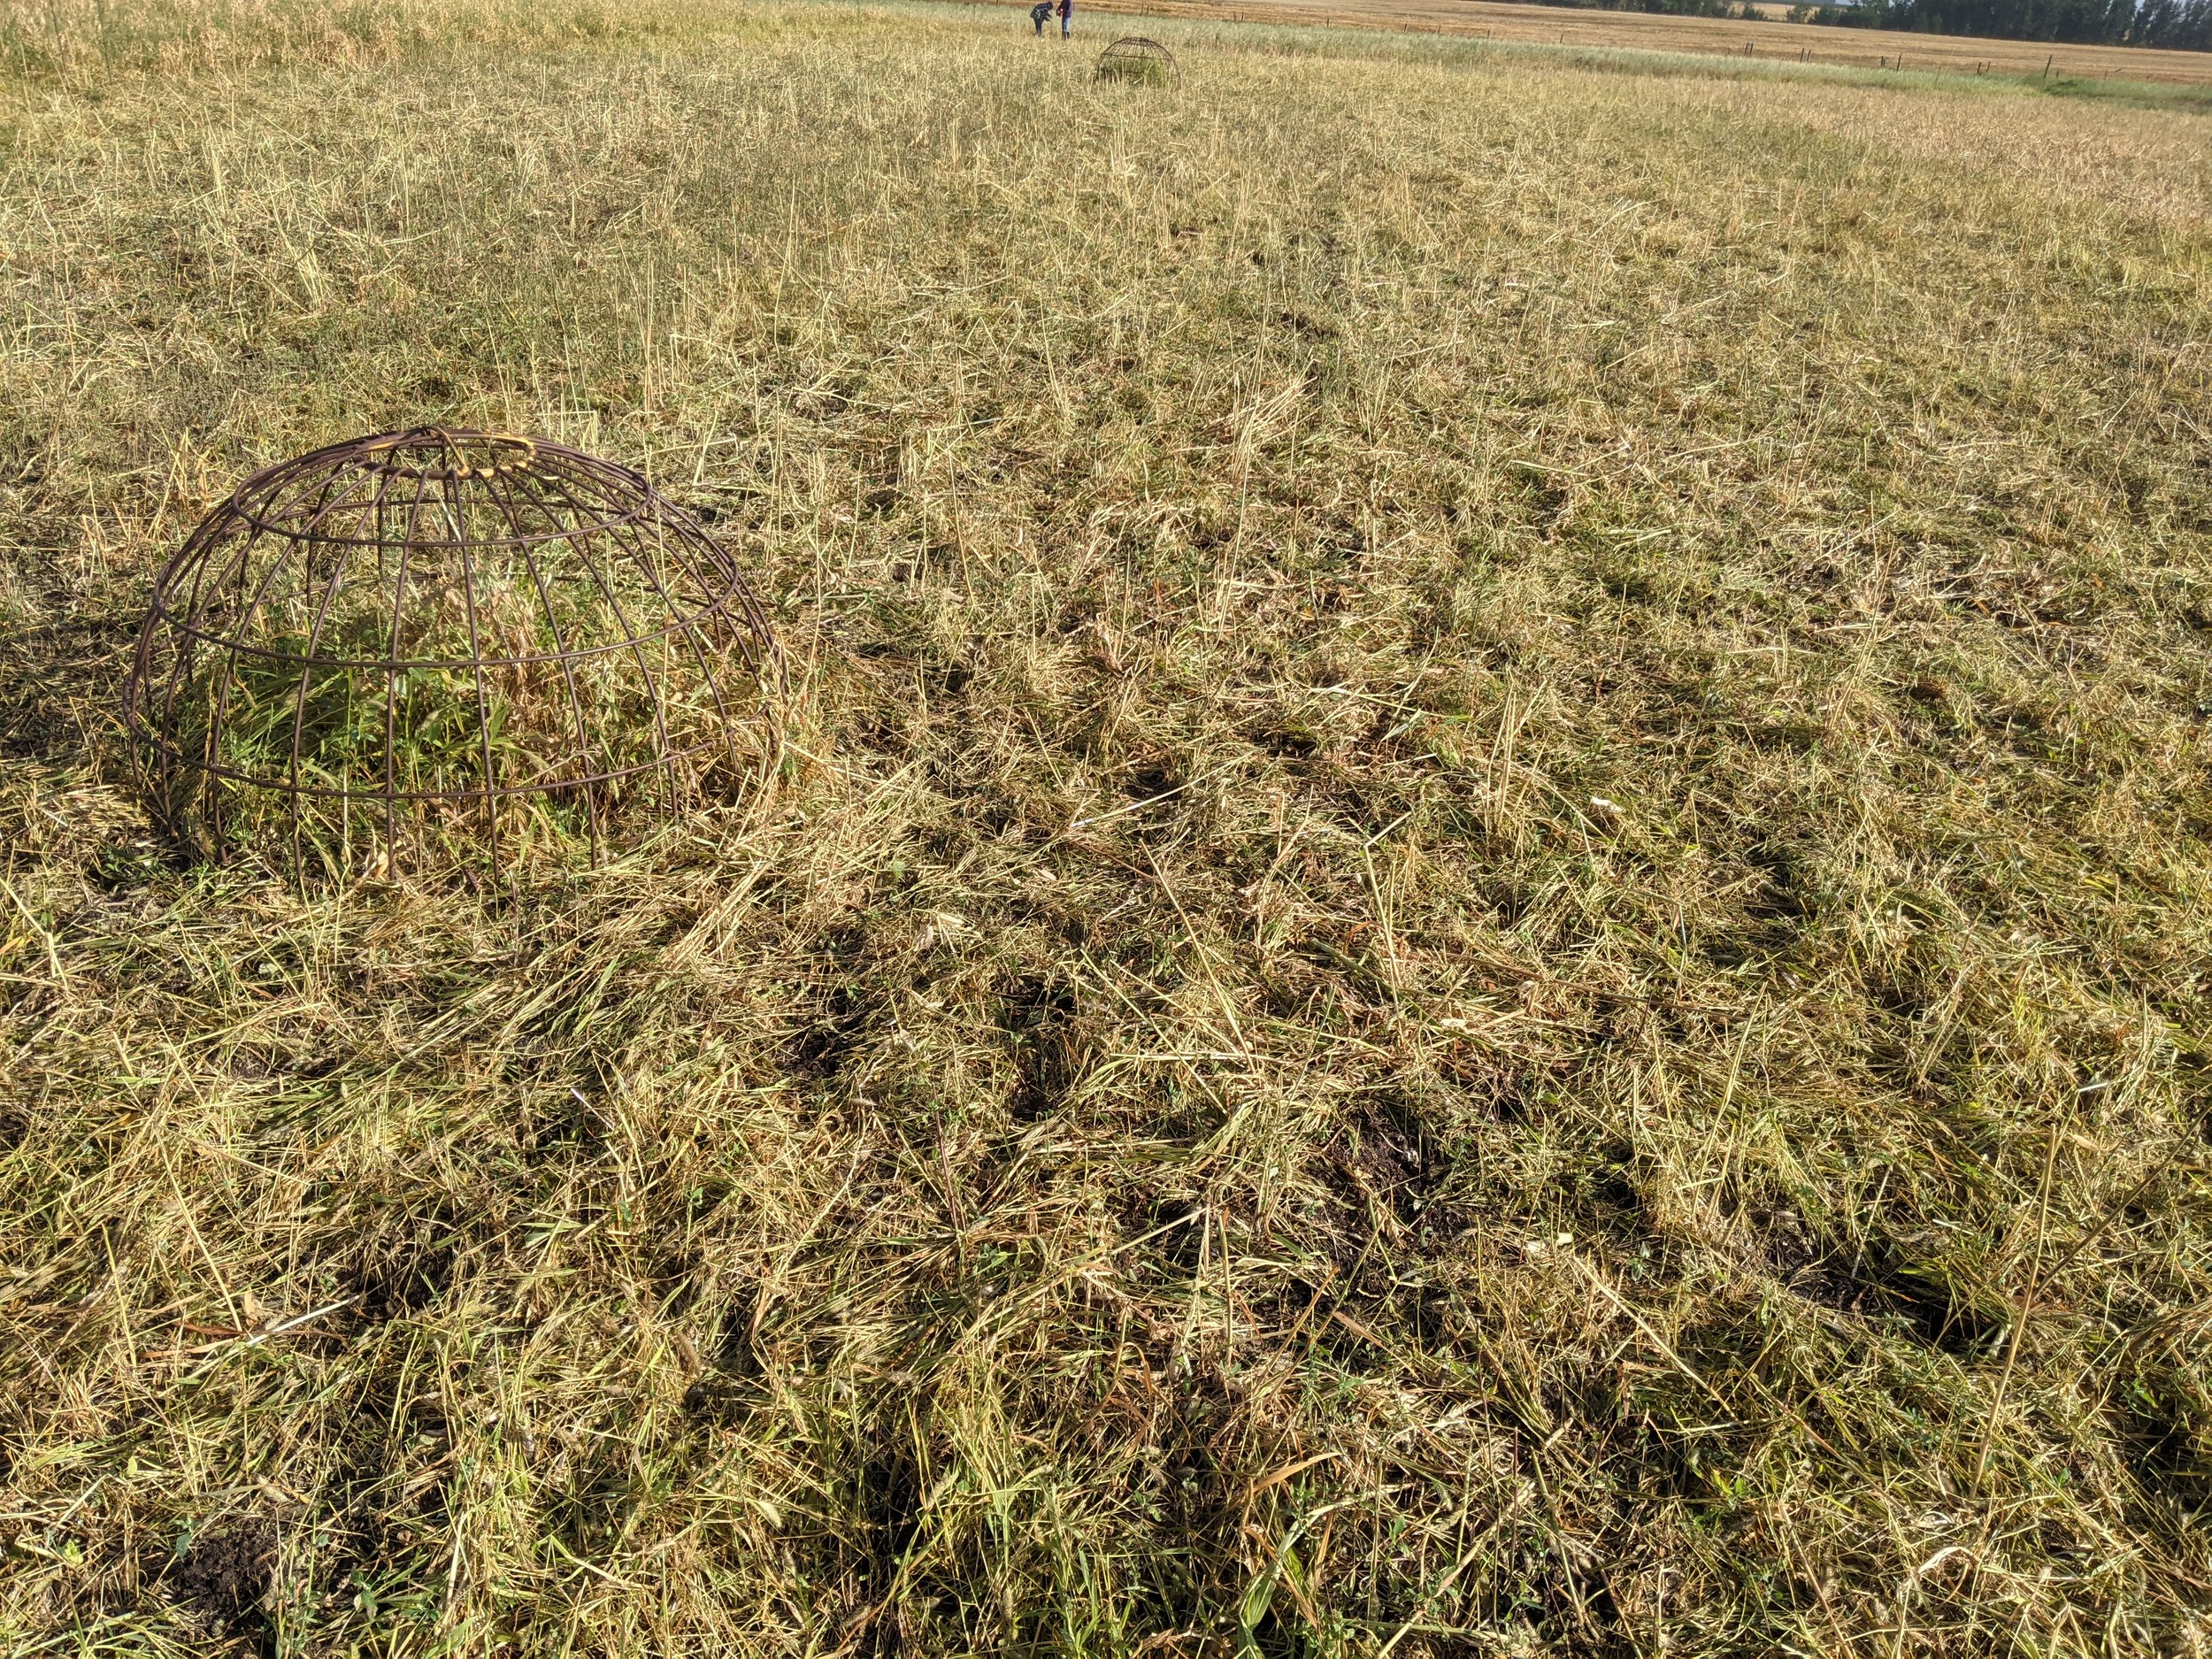 Residue after grazing